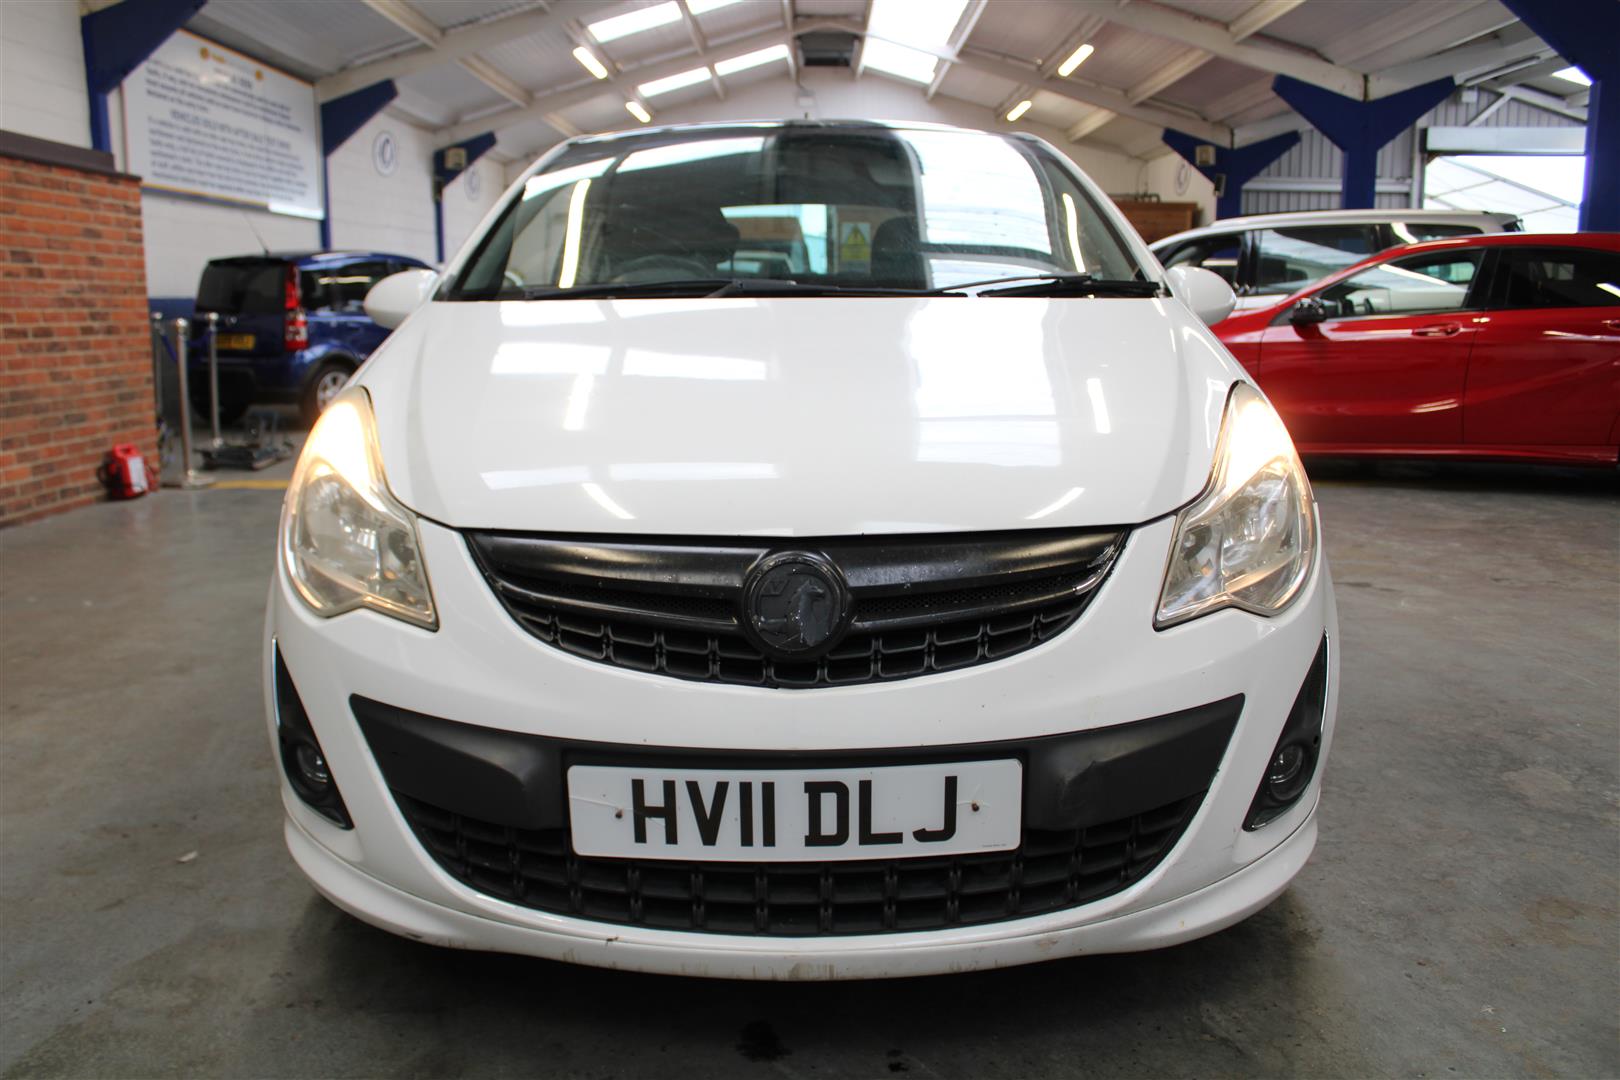 11 11 Vauxhall Corsa Limited Edition - Image 2 of 33